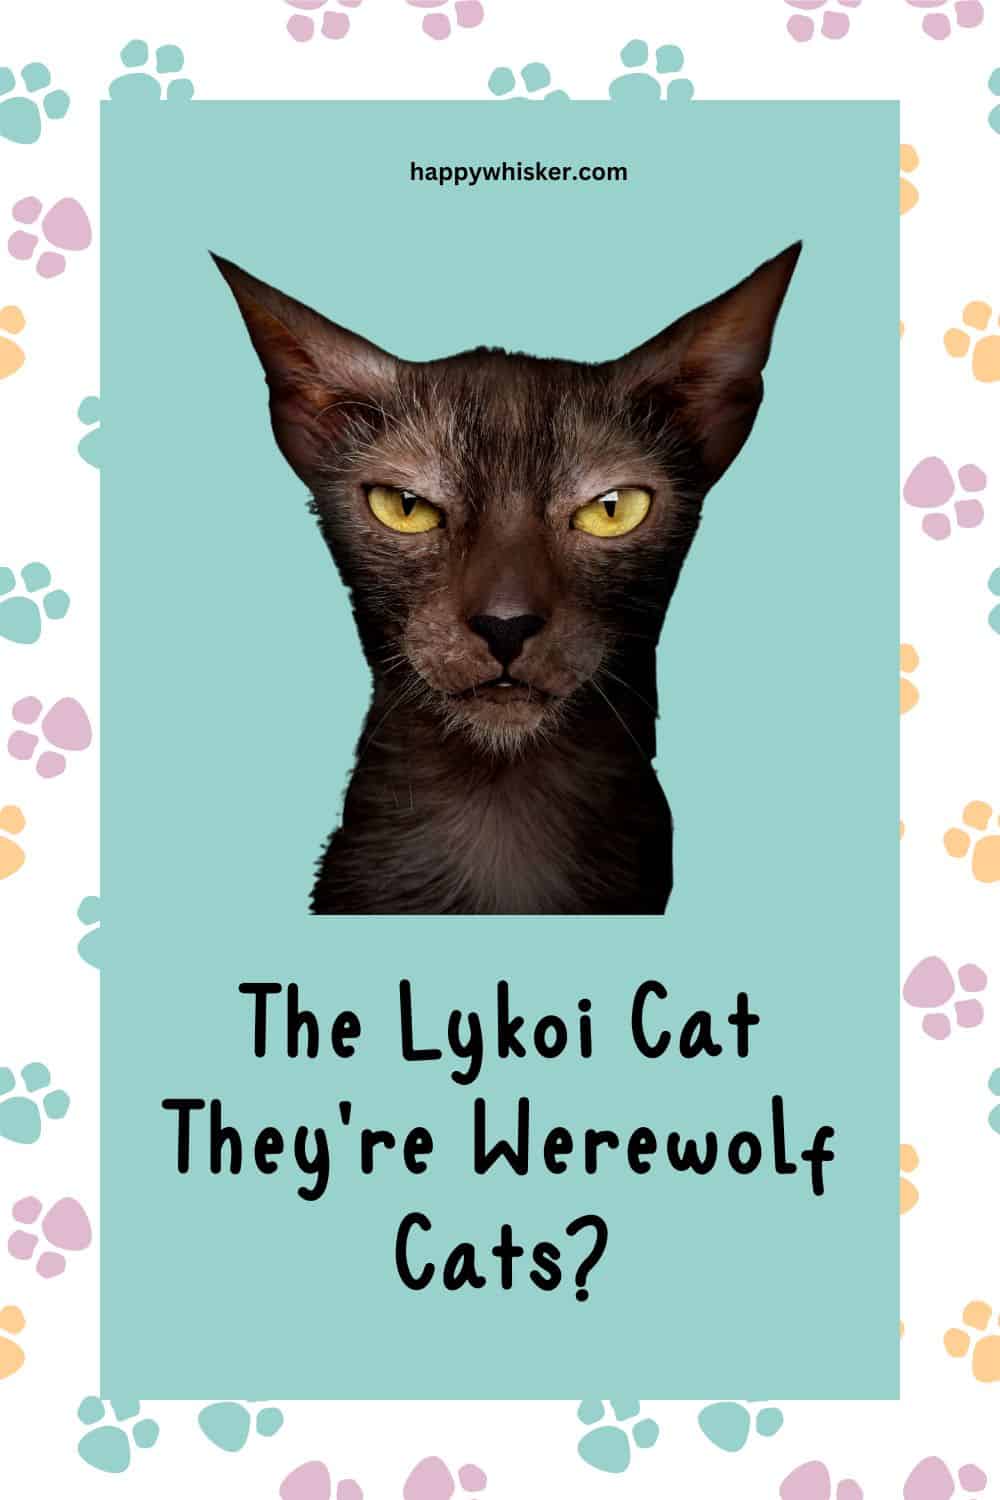 The Lykoi Cat – Why Do We Say They're Werewolf Cats Pinterest